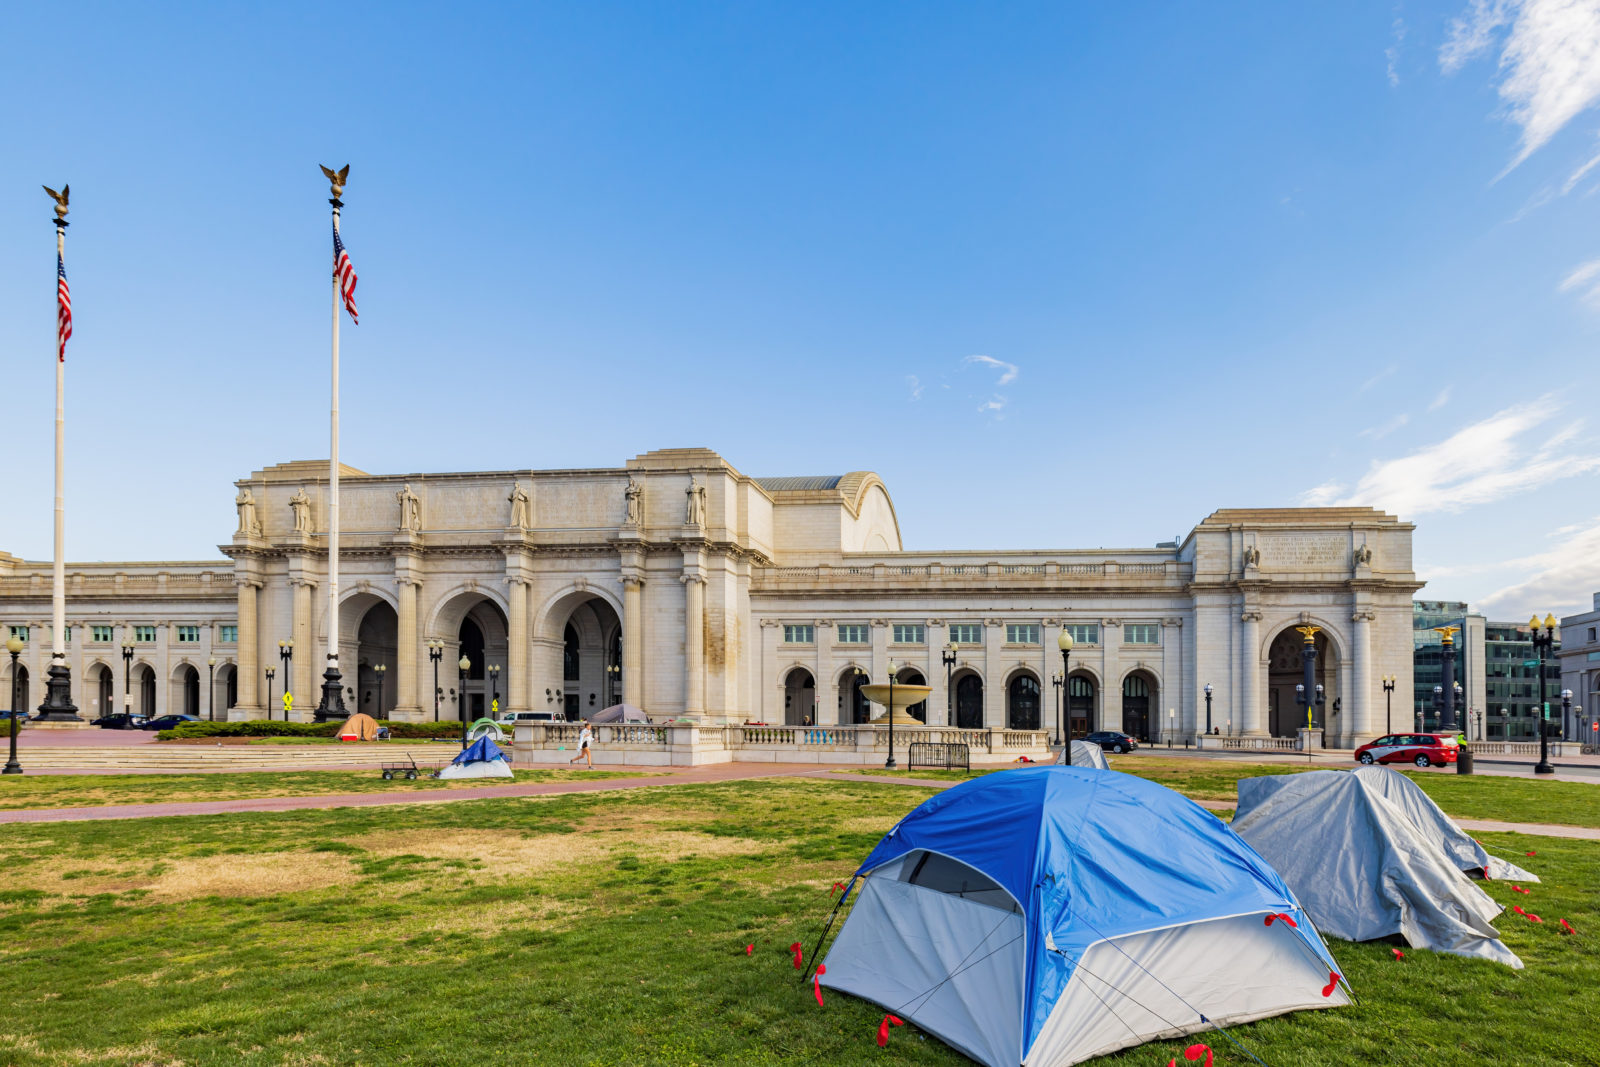 Sunny view of some homeless tent in front of the Union Station